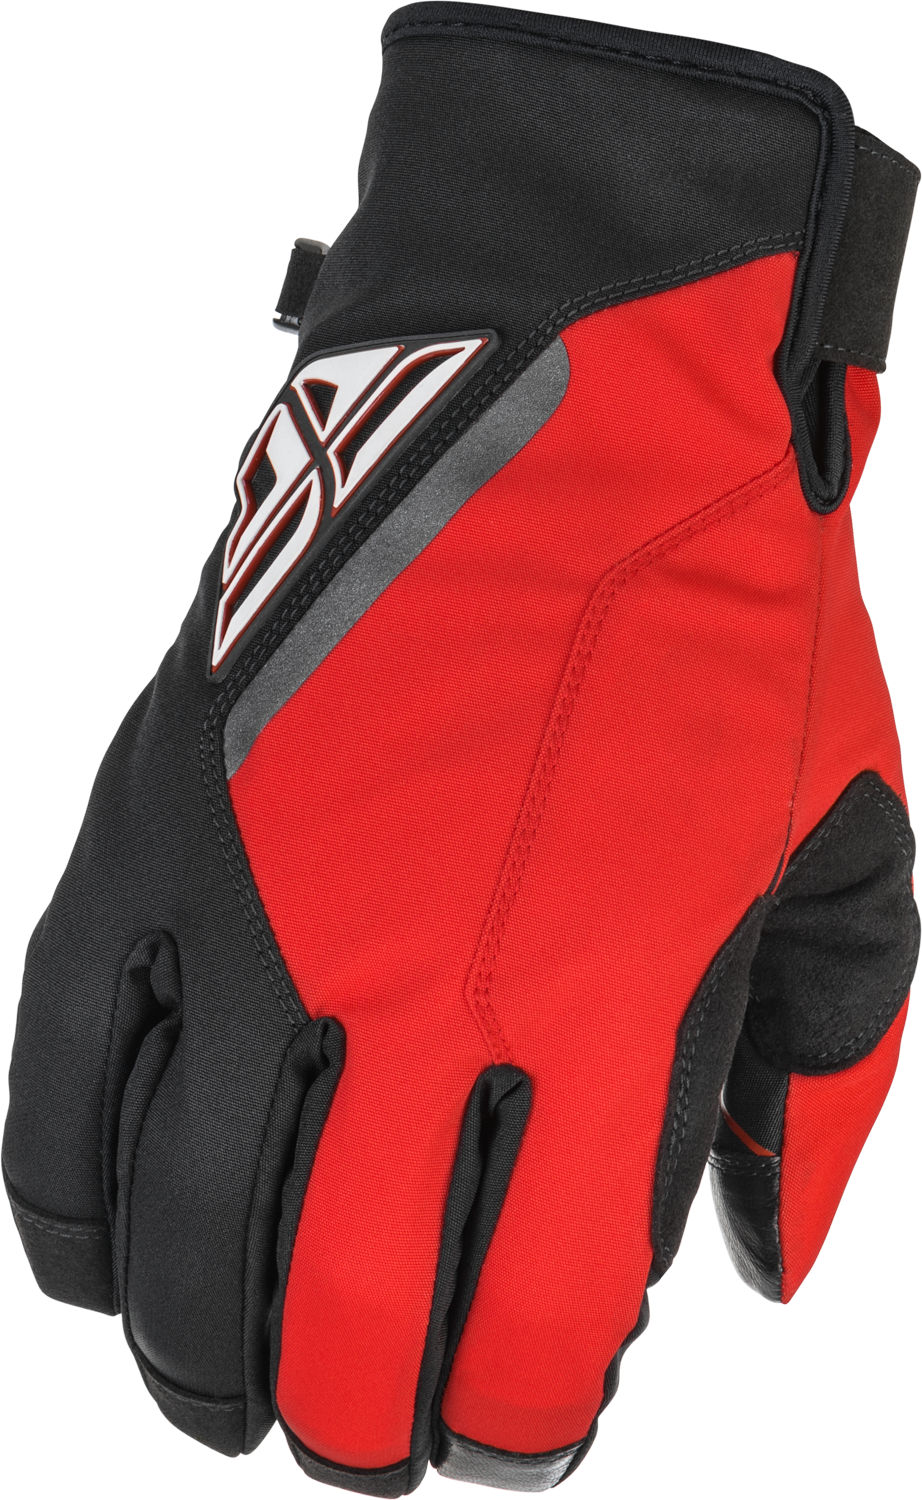 FLY RACING Title Gloves Black/Red Sz 13 371-05313